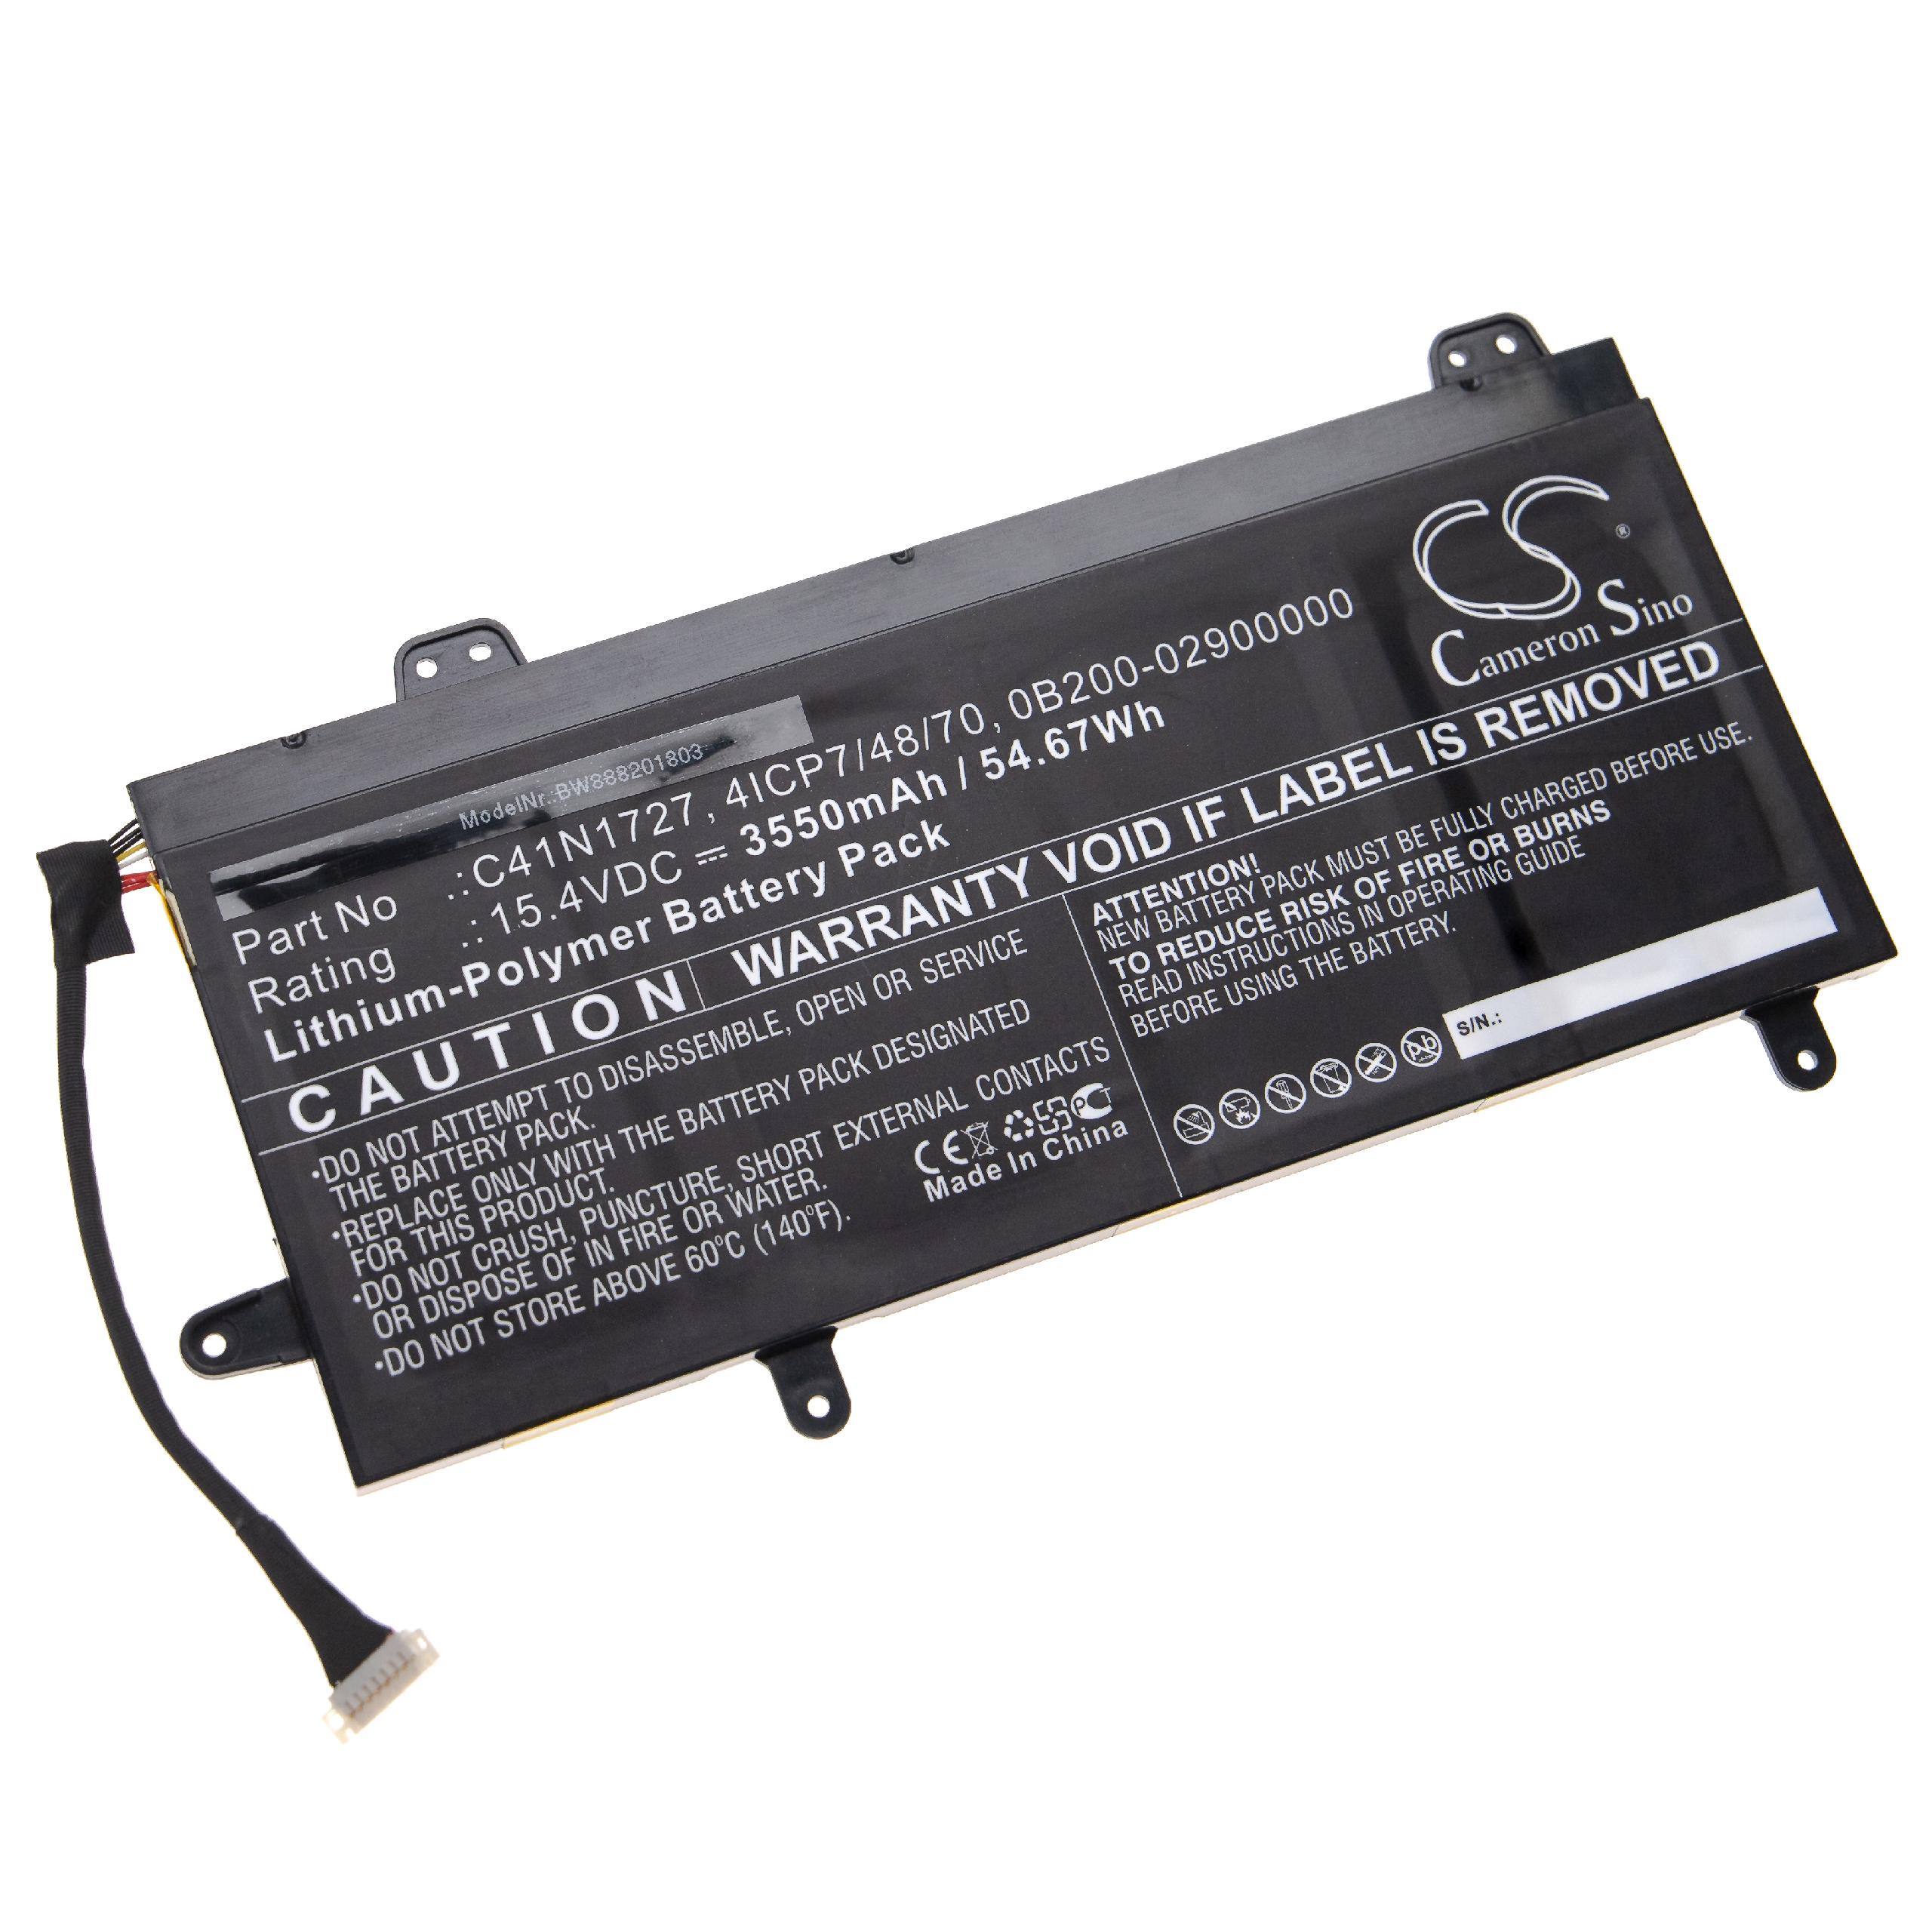 Notebook Battery Replacement for Asus C41N1727, 4ICP7/48/70, 0B200-02900000 - 3550mAh 15.4V Li-polymer